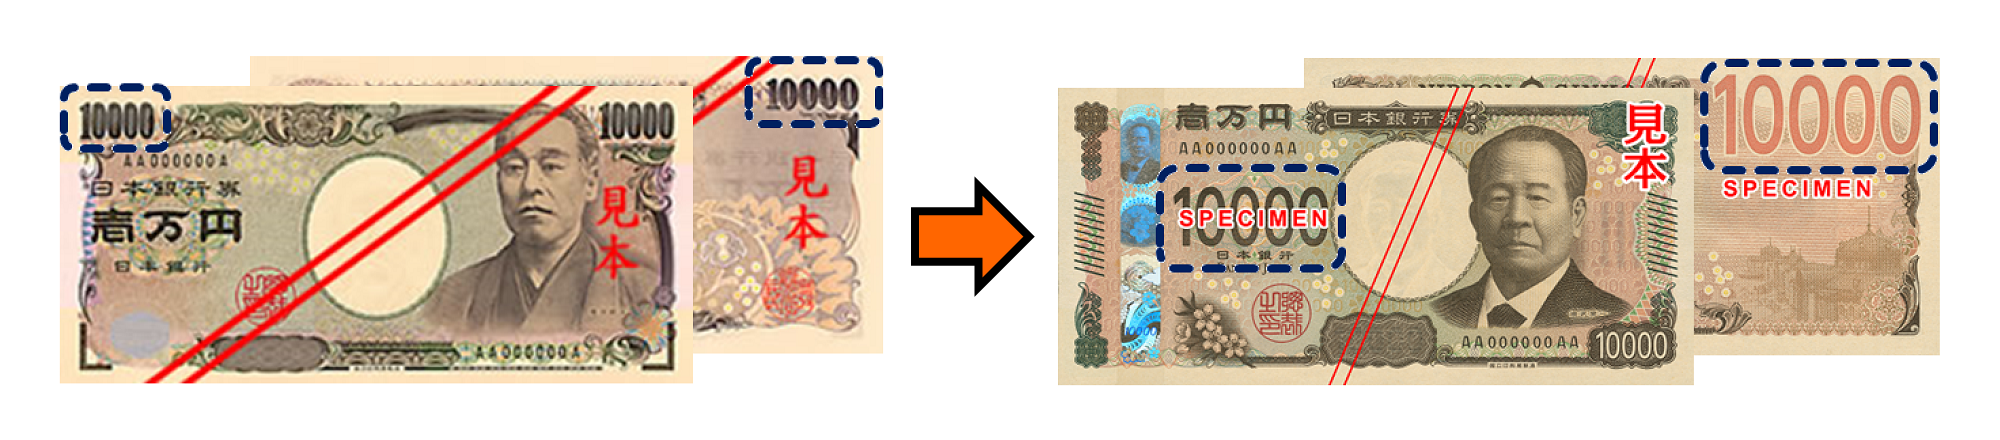 Images of the current and new 10,000 yen notes shown to compare the size of the numerals indicating the face value.